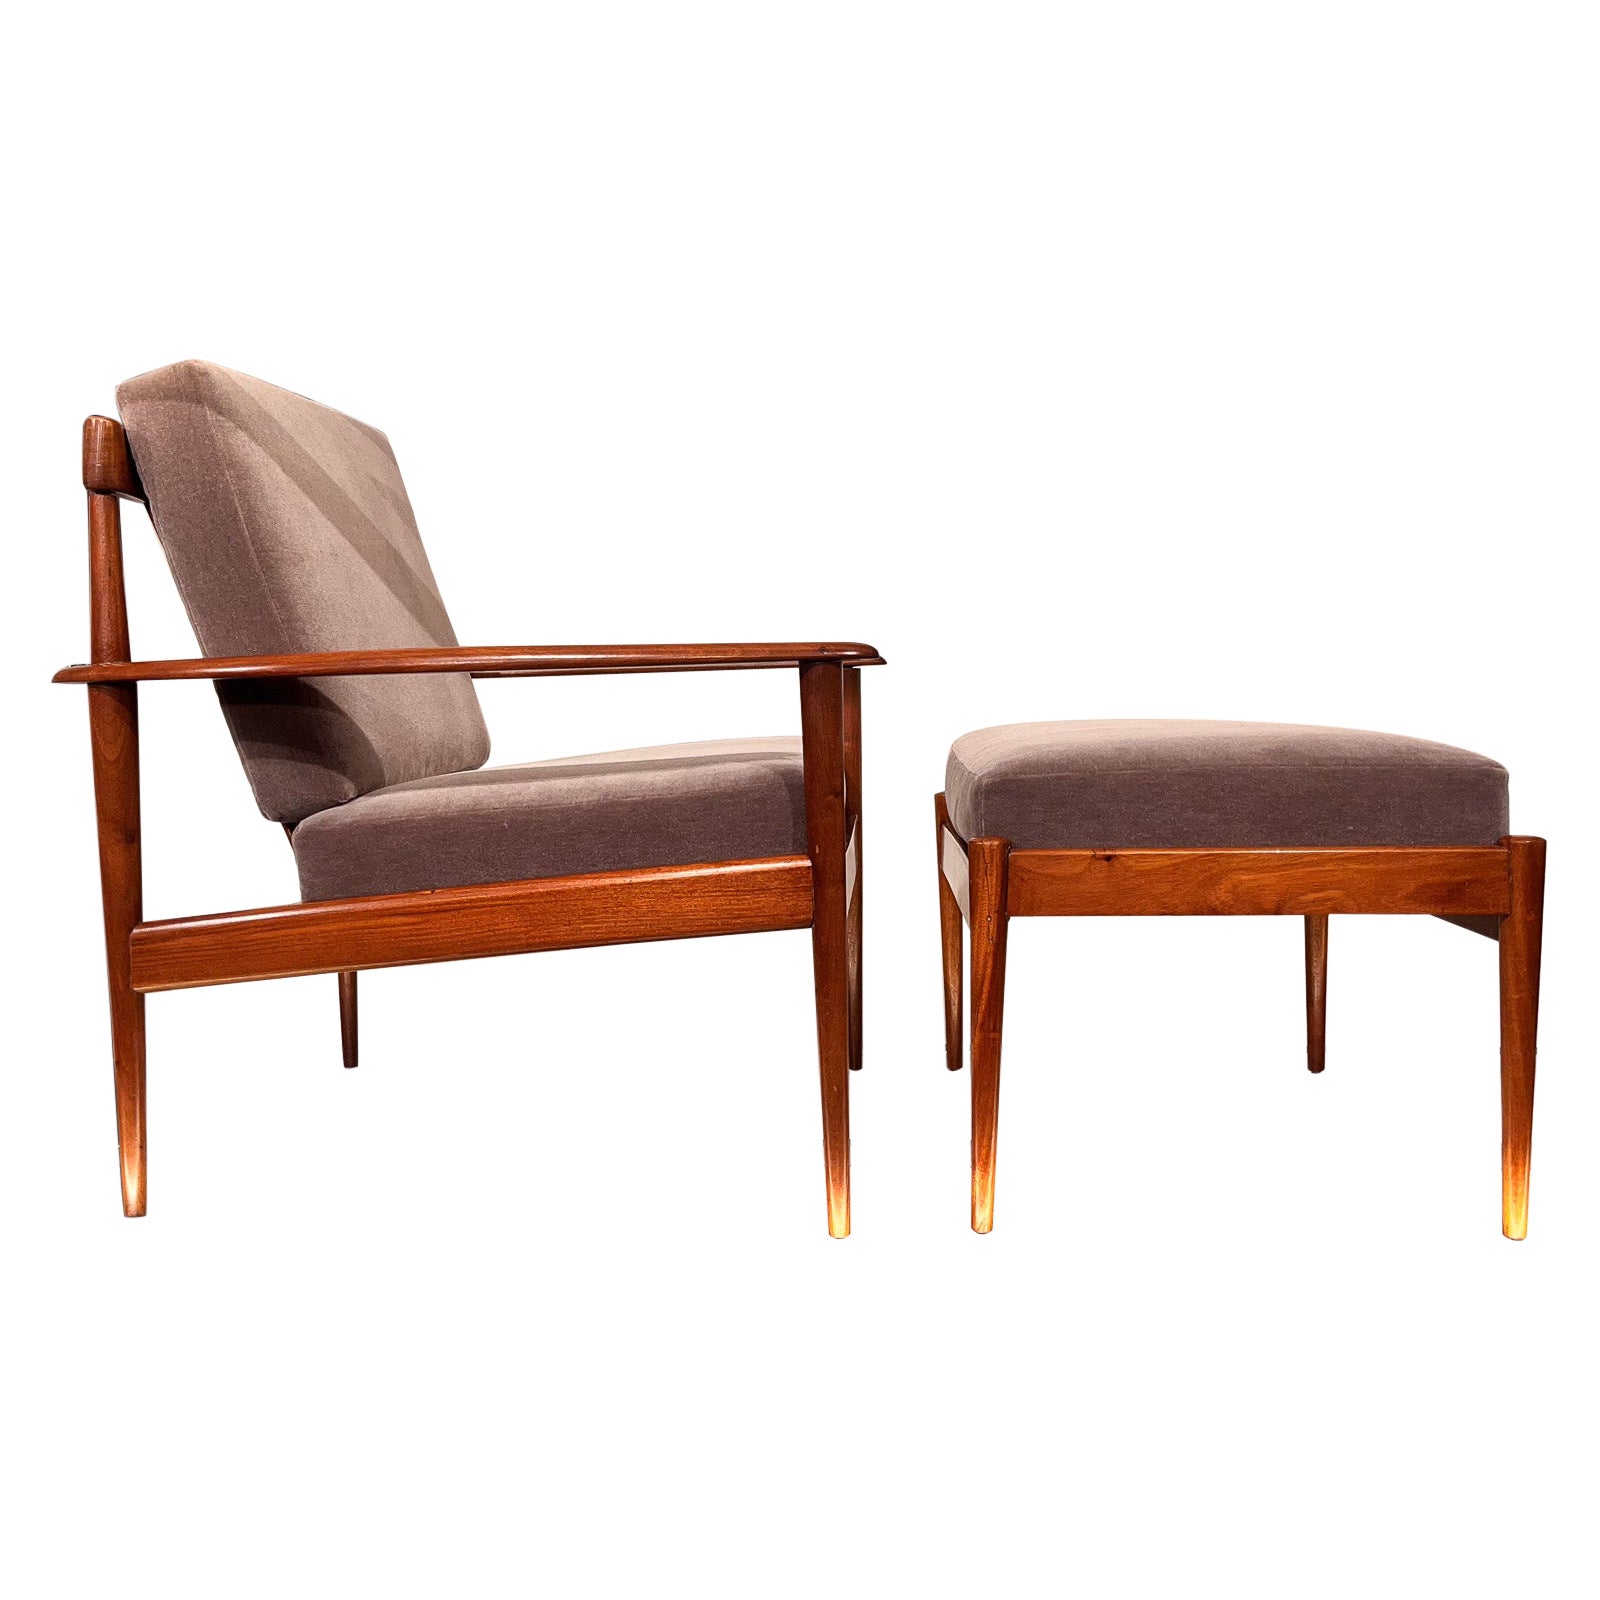 Grete Jalk Armchair with Ottoman in Caviuna Wood & Beige Fabric, Rino Levi, 1960 For Sale